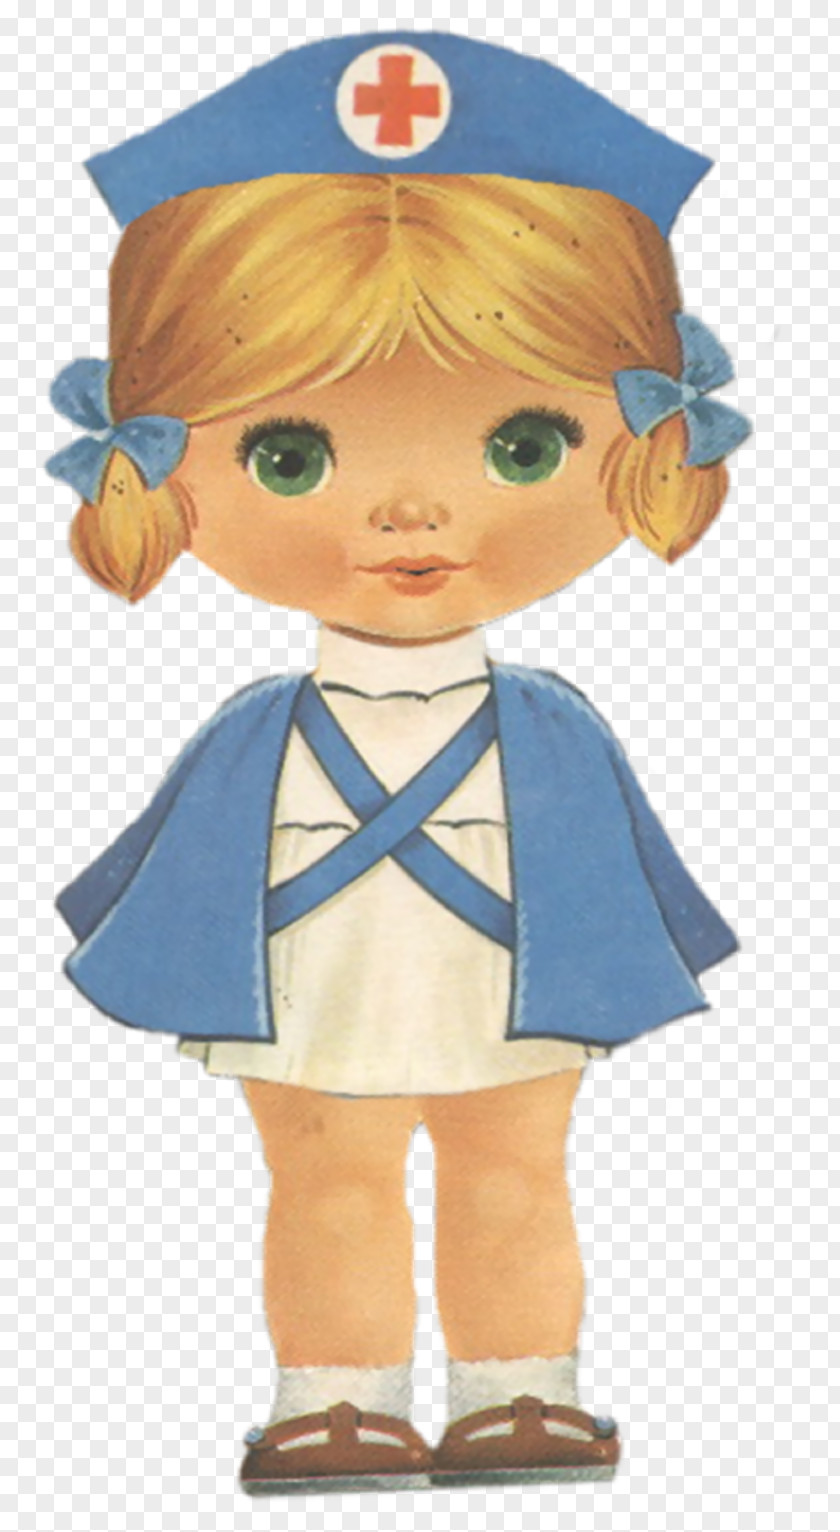 Doll Toddler Figurine Cartoon PNG